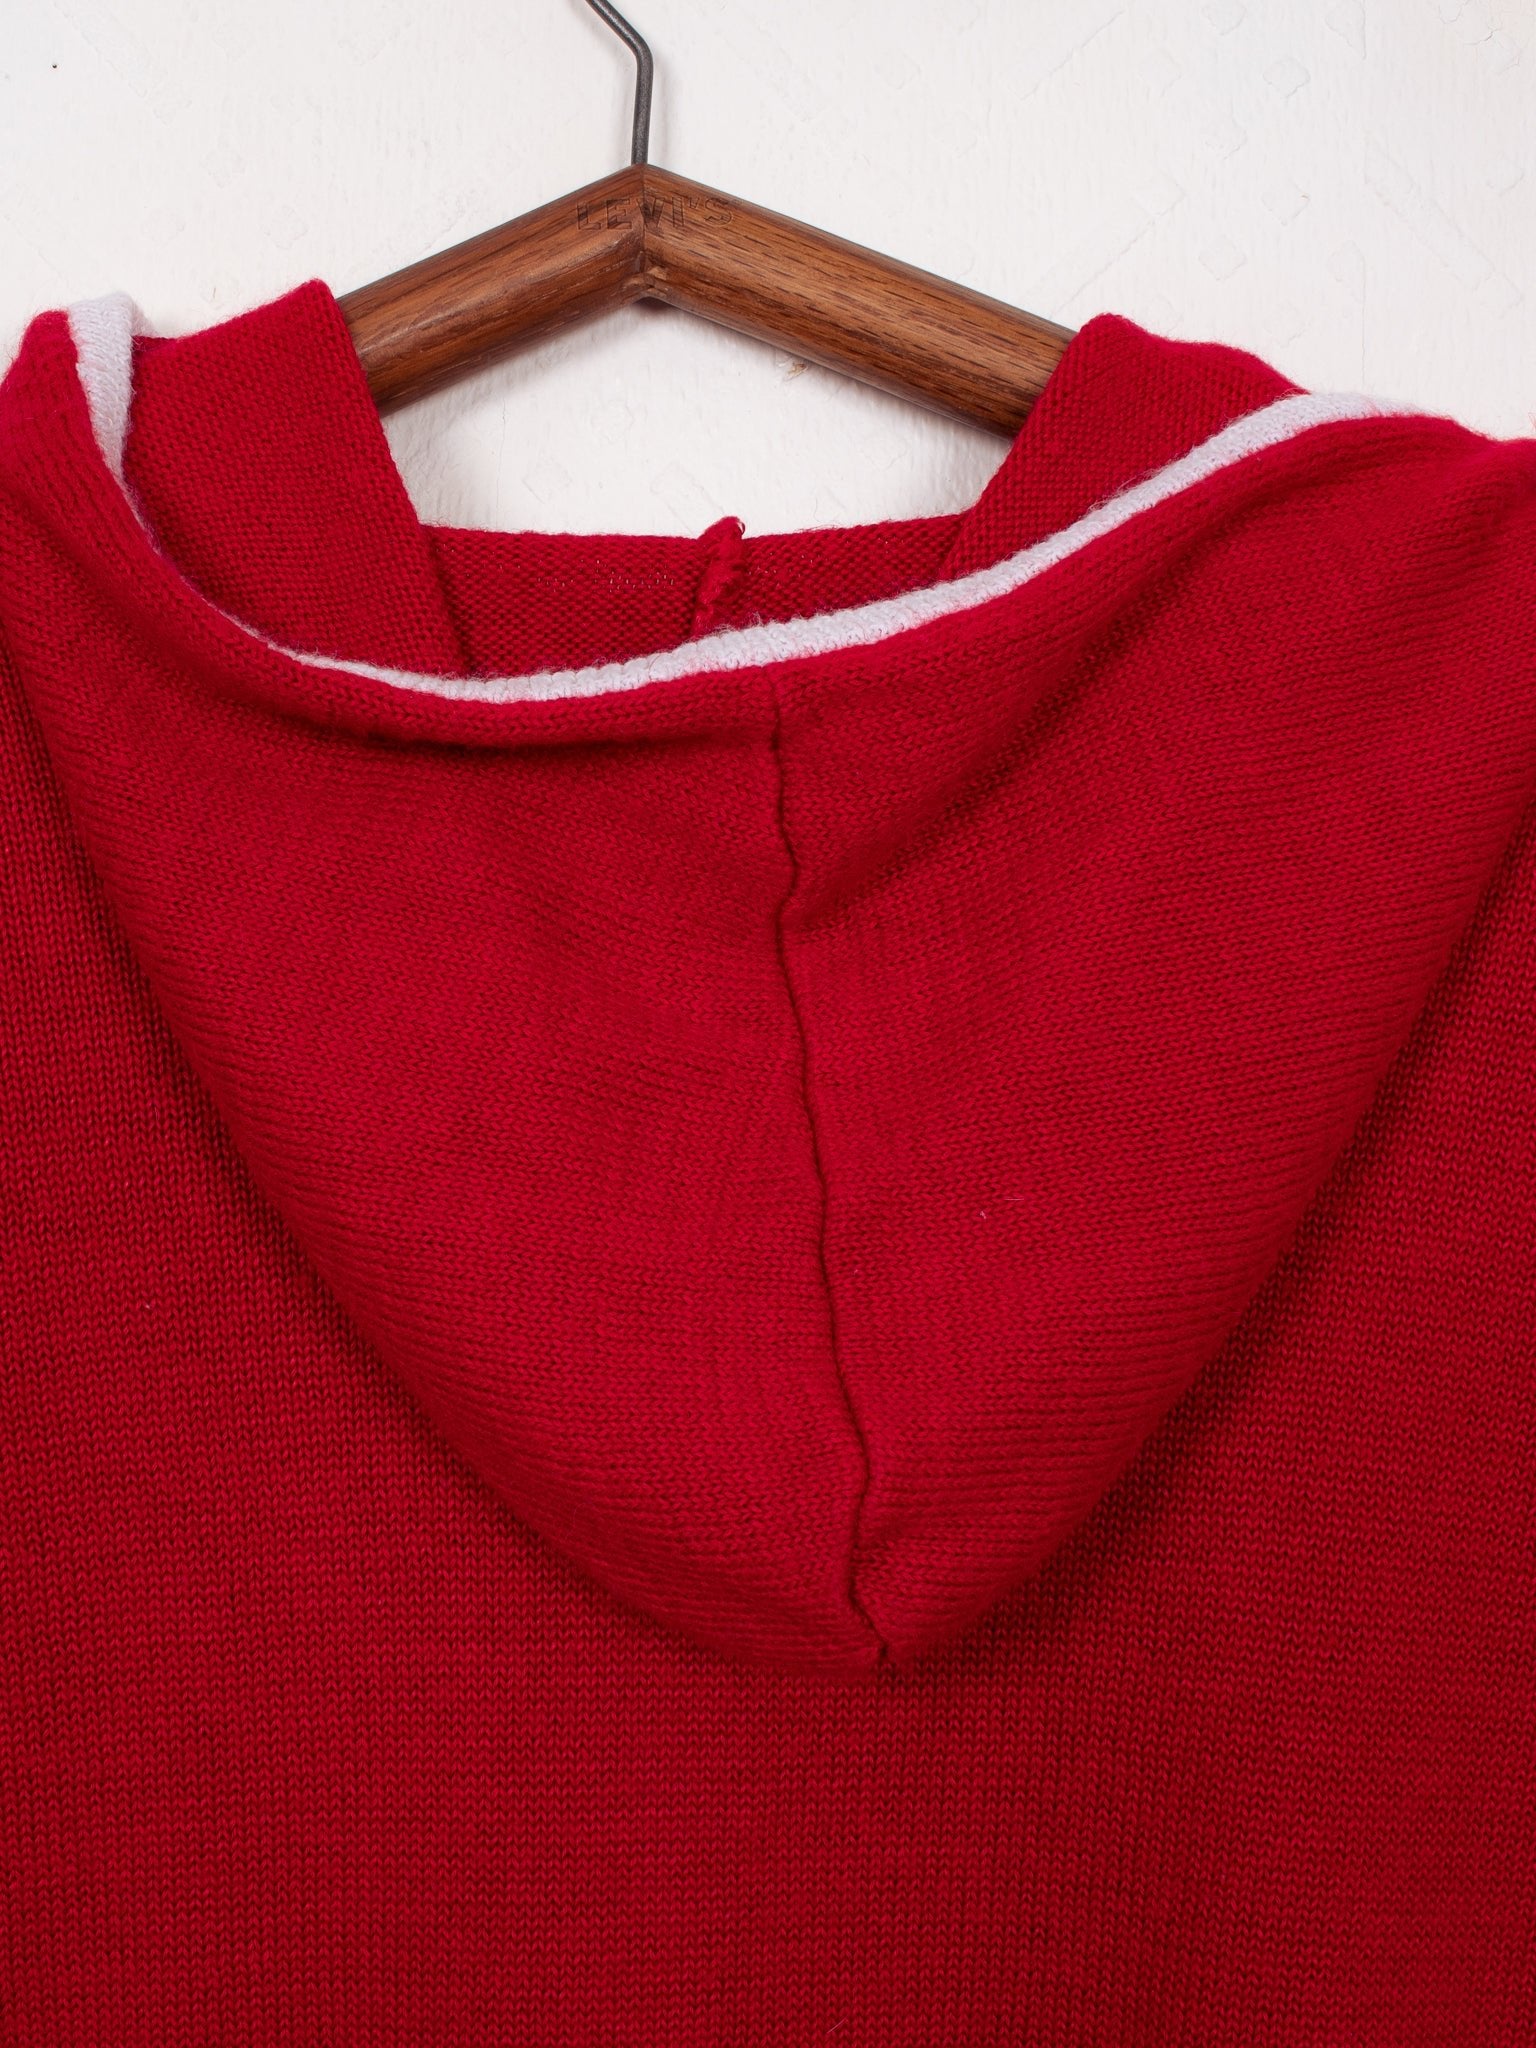 sweaters & knits 70s Hooded Hockey Knit - L